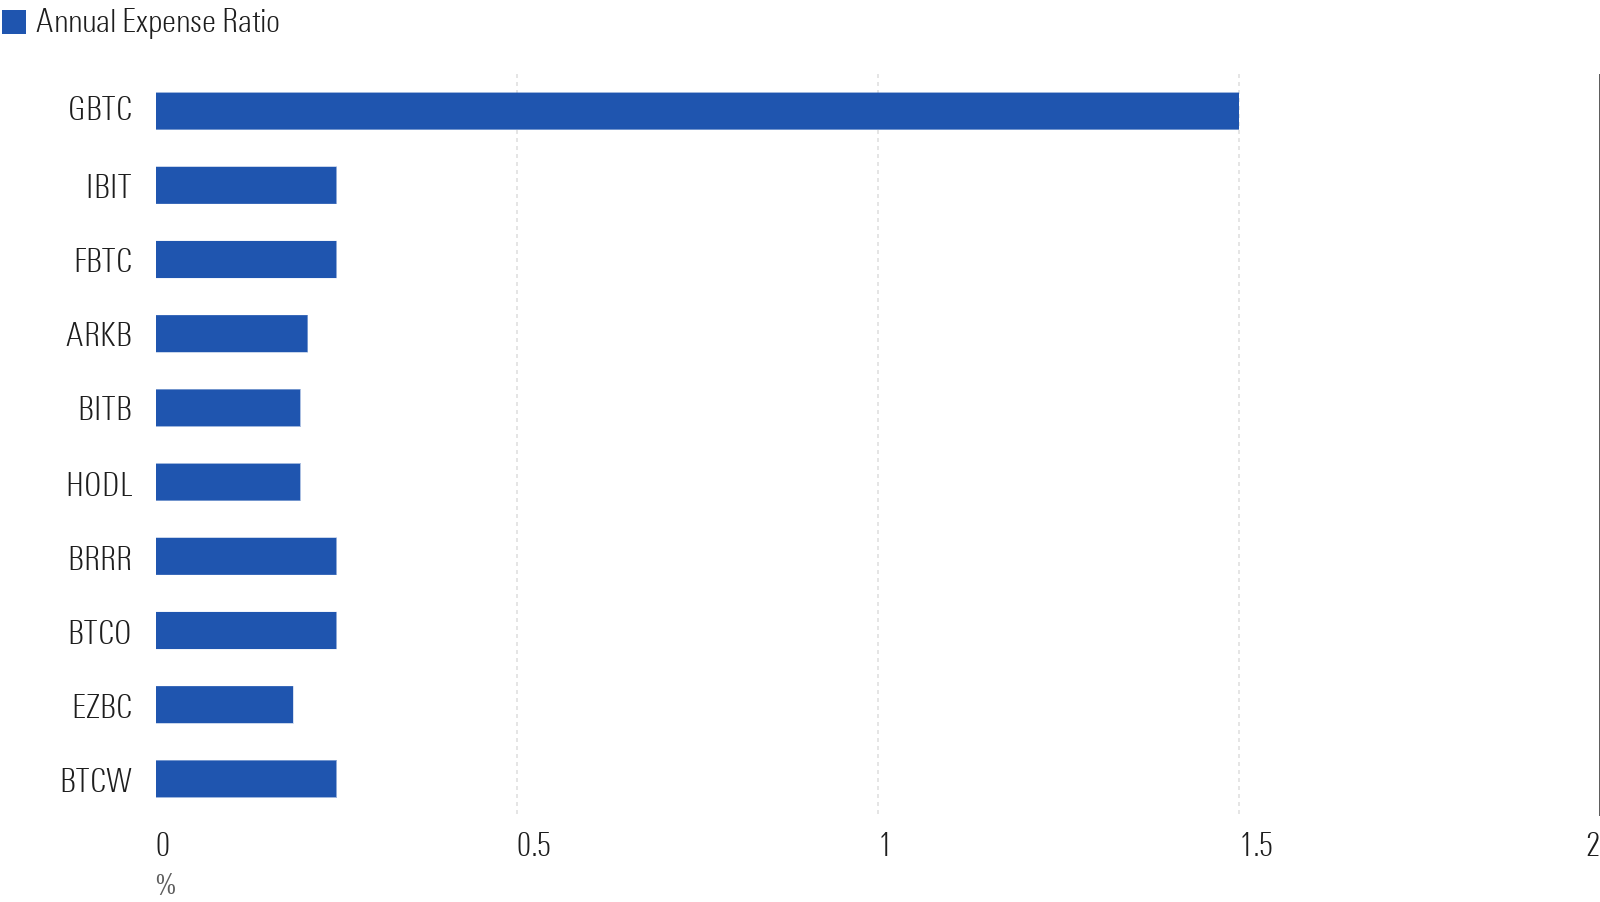 Bar chart showing expense ratios for spot bitcoin ETFs, all are around 0.20%-0.25% except GBTC which is 1.5%.